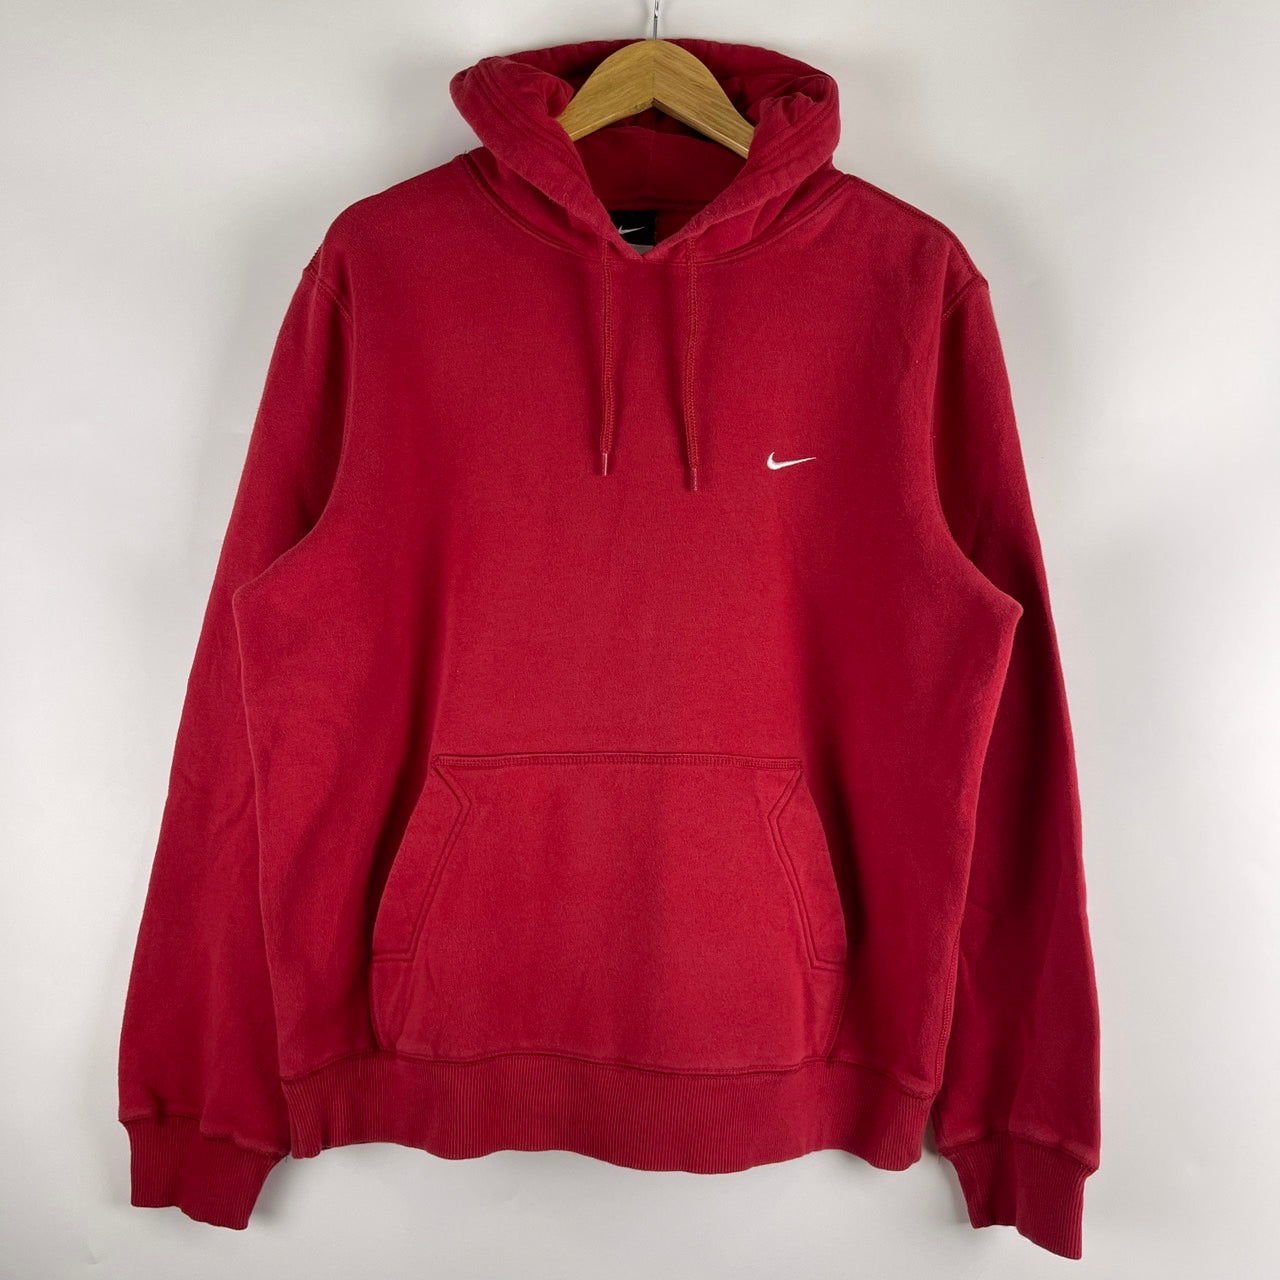 Vintage Nike Miniswoosh embroidered 00's Red cherry pullover 